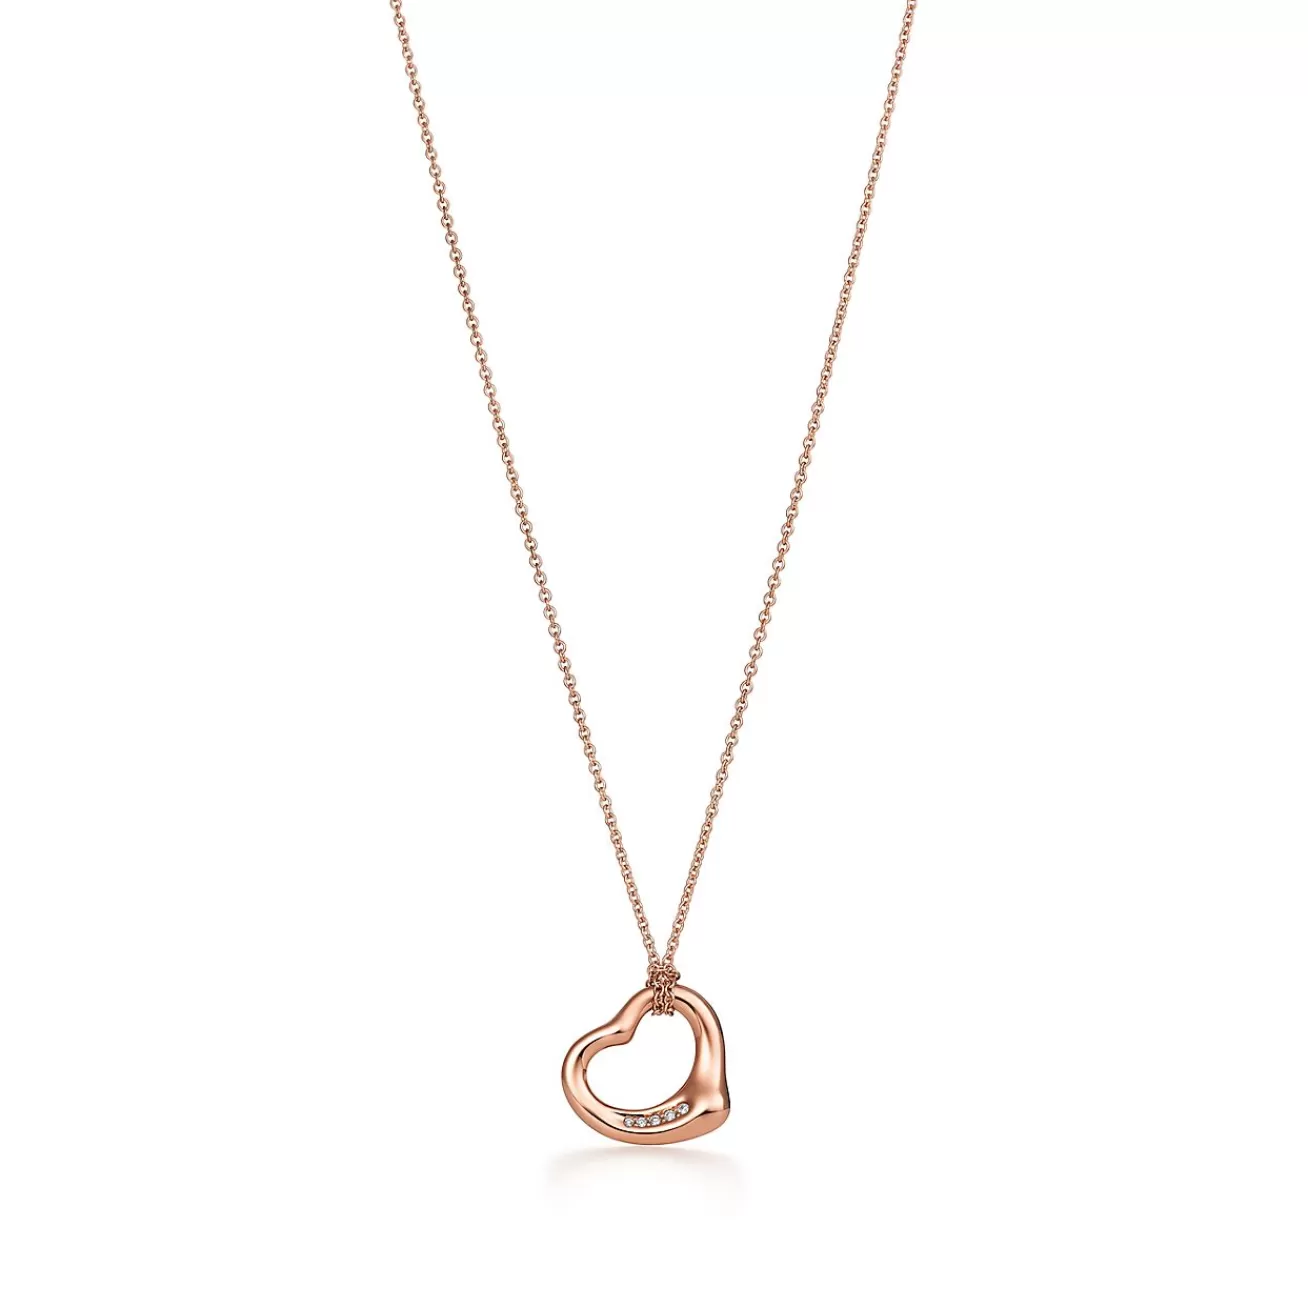 Tiffany & Co. Elsa Peretti® Open Heart pendant in 18k rose gold with diamonds. | ^ Necklaces & Pendants | Rose Gold Jewelry